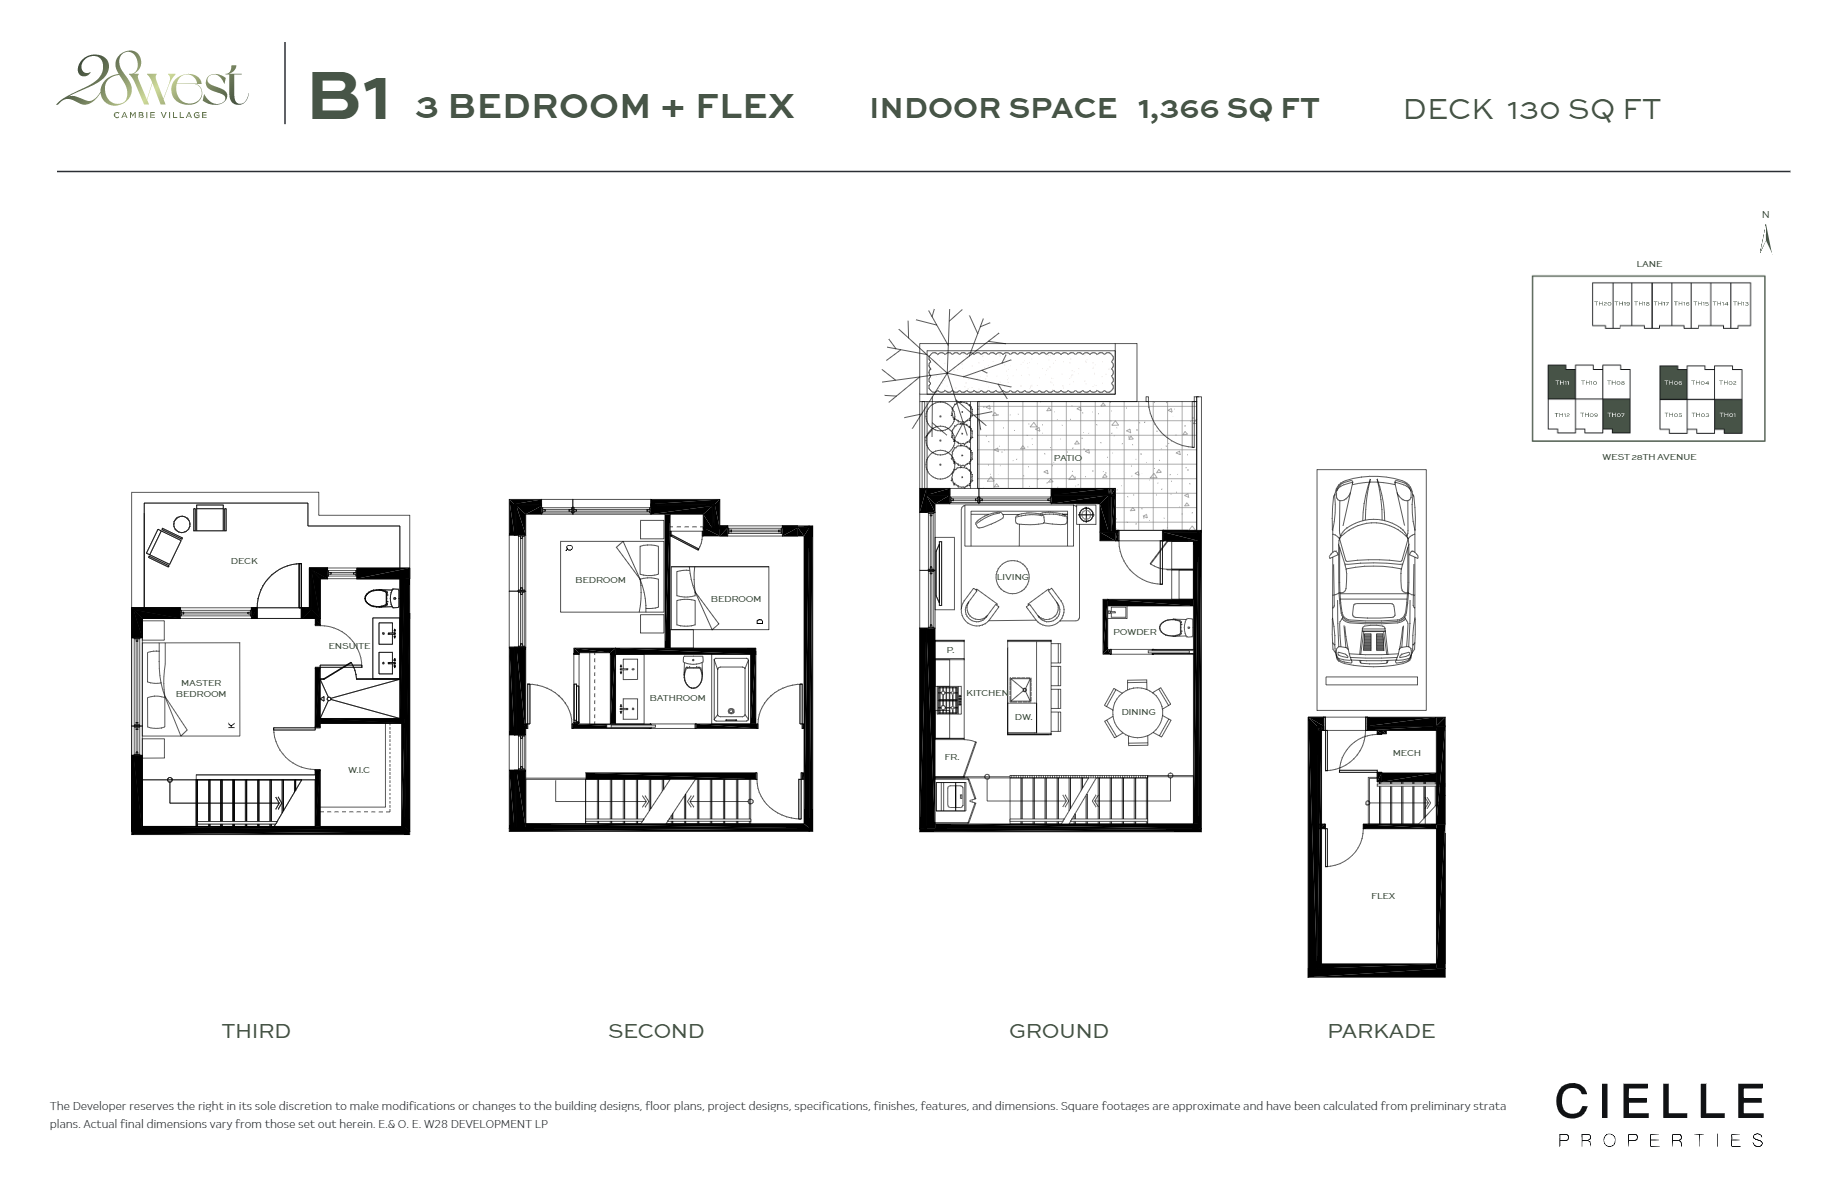 Suite B1 Floor Plan of 28West Towns with undefined beds